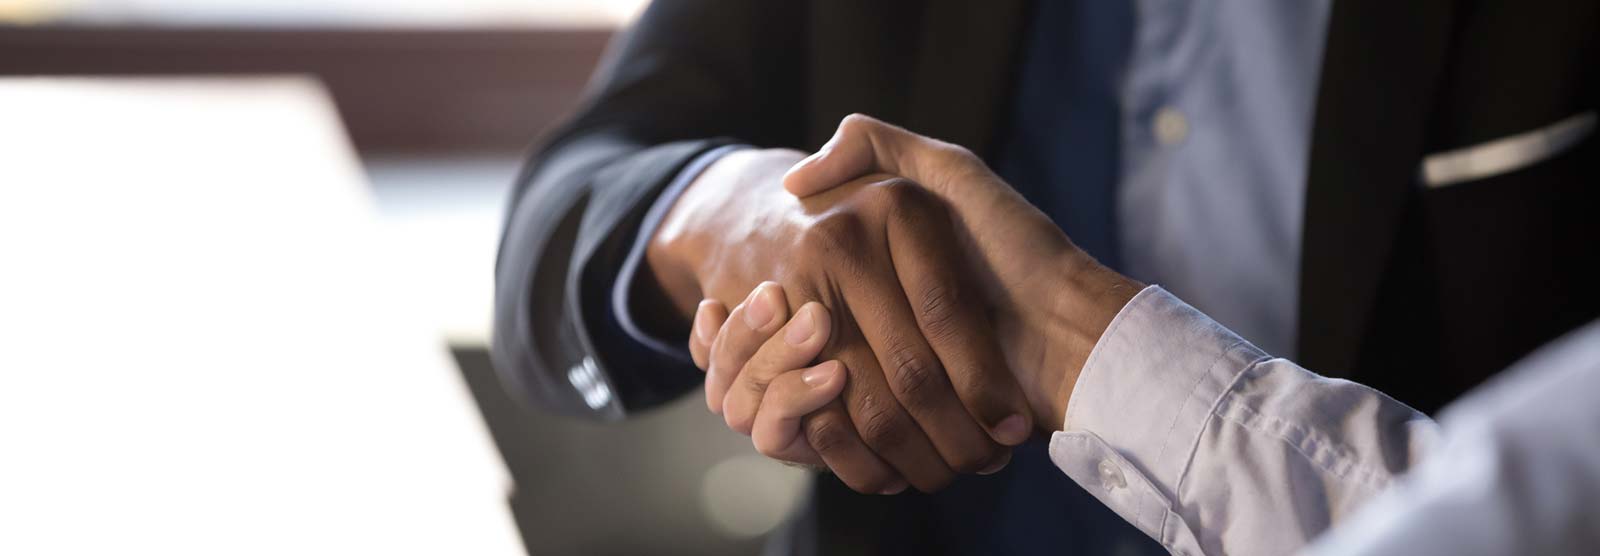 Business people shaking hands in a meeting